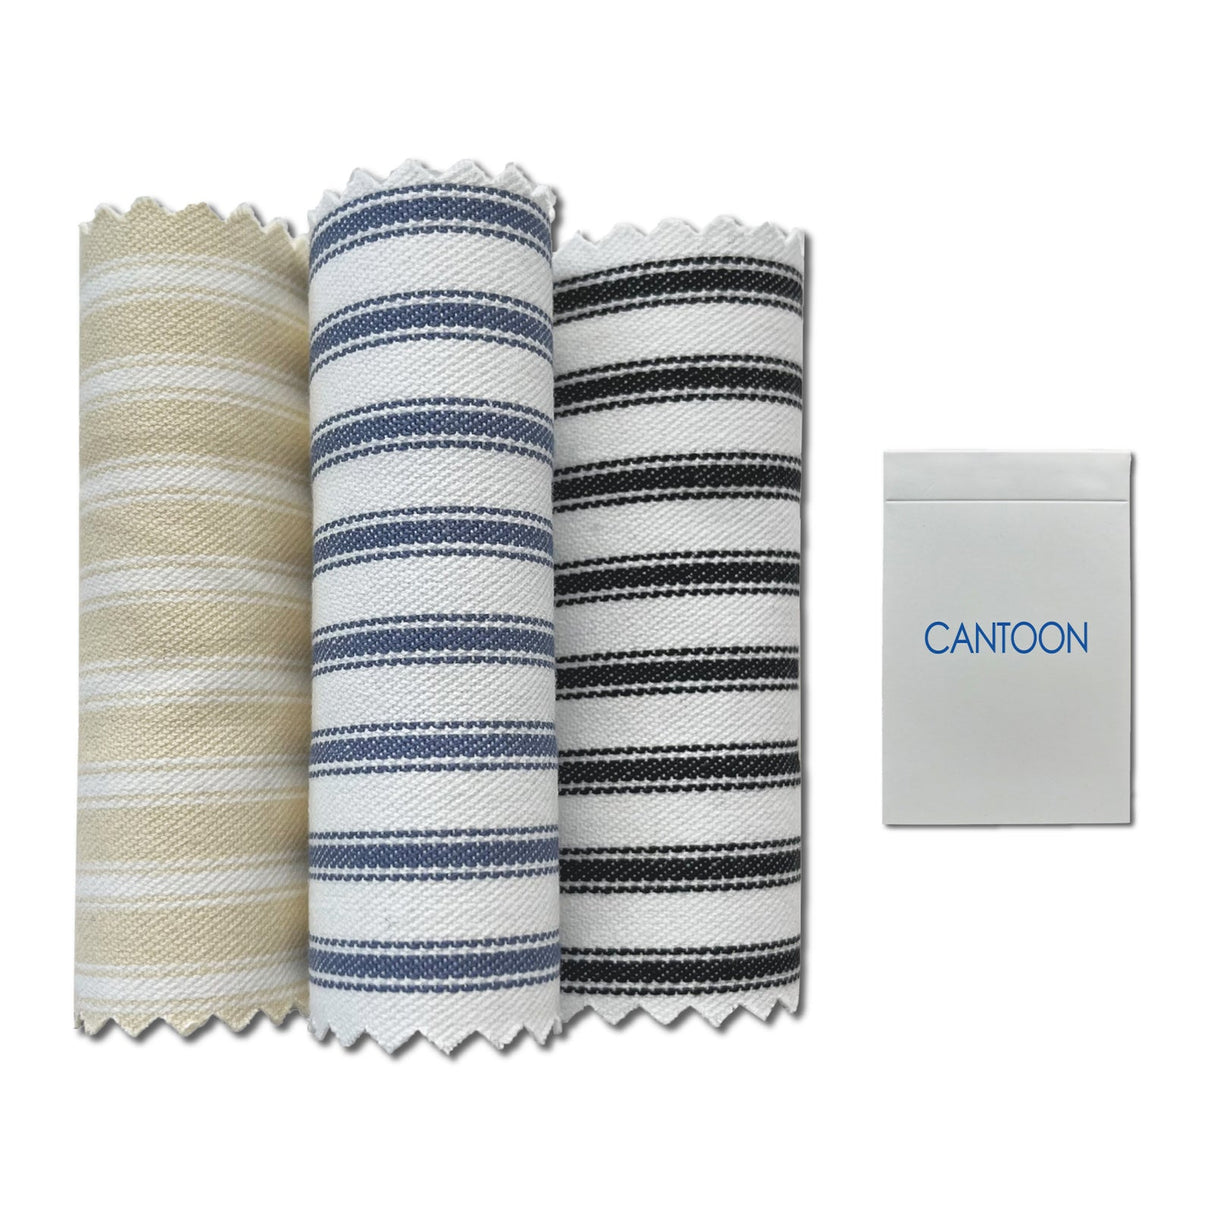 GEX Cantoon Cotton Curtain Sample Booklet - GexWorldwide